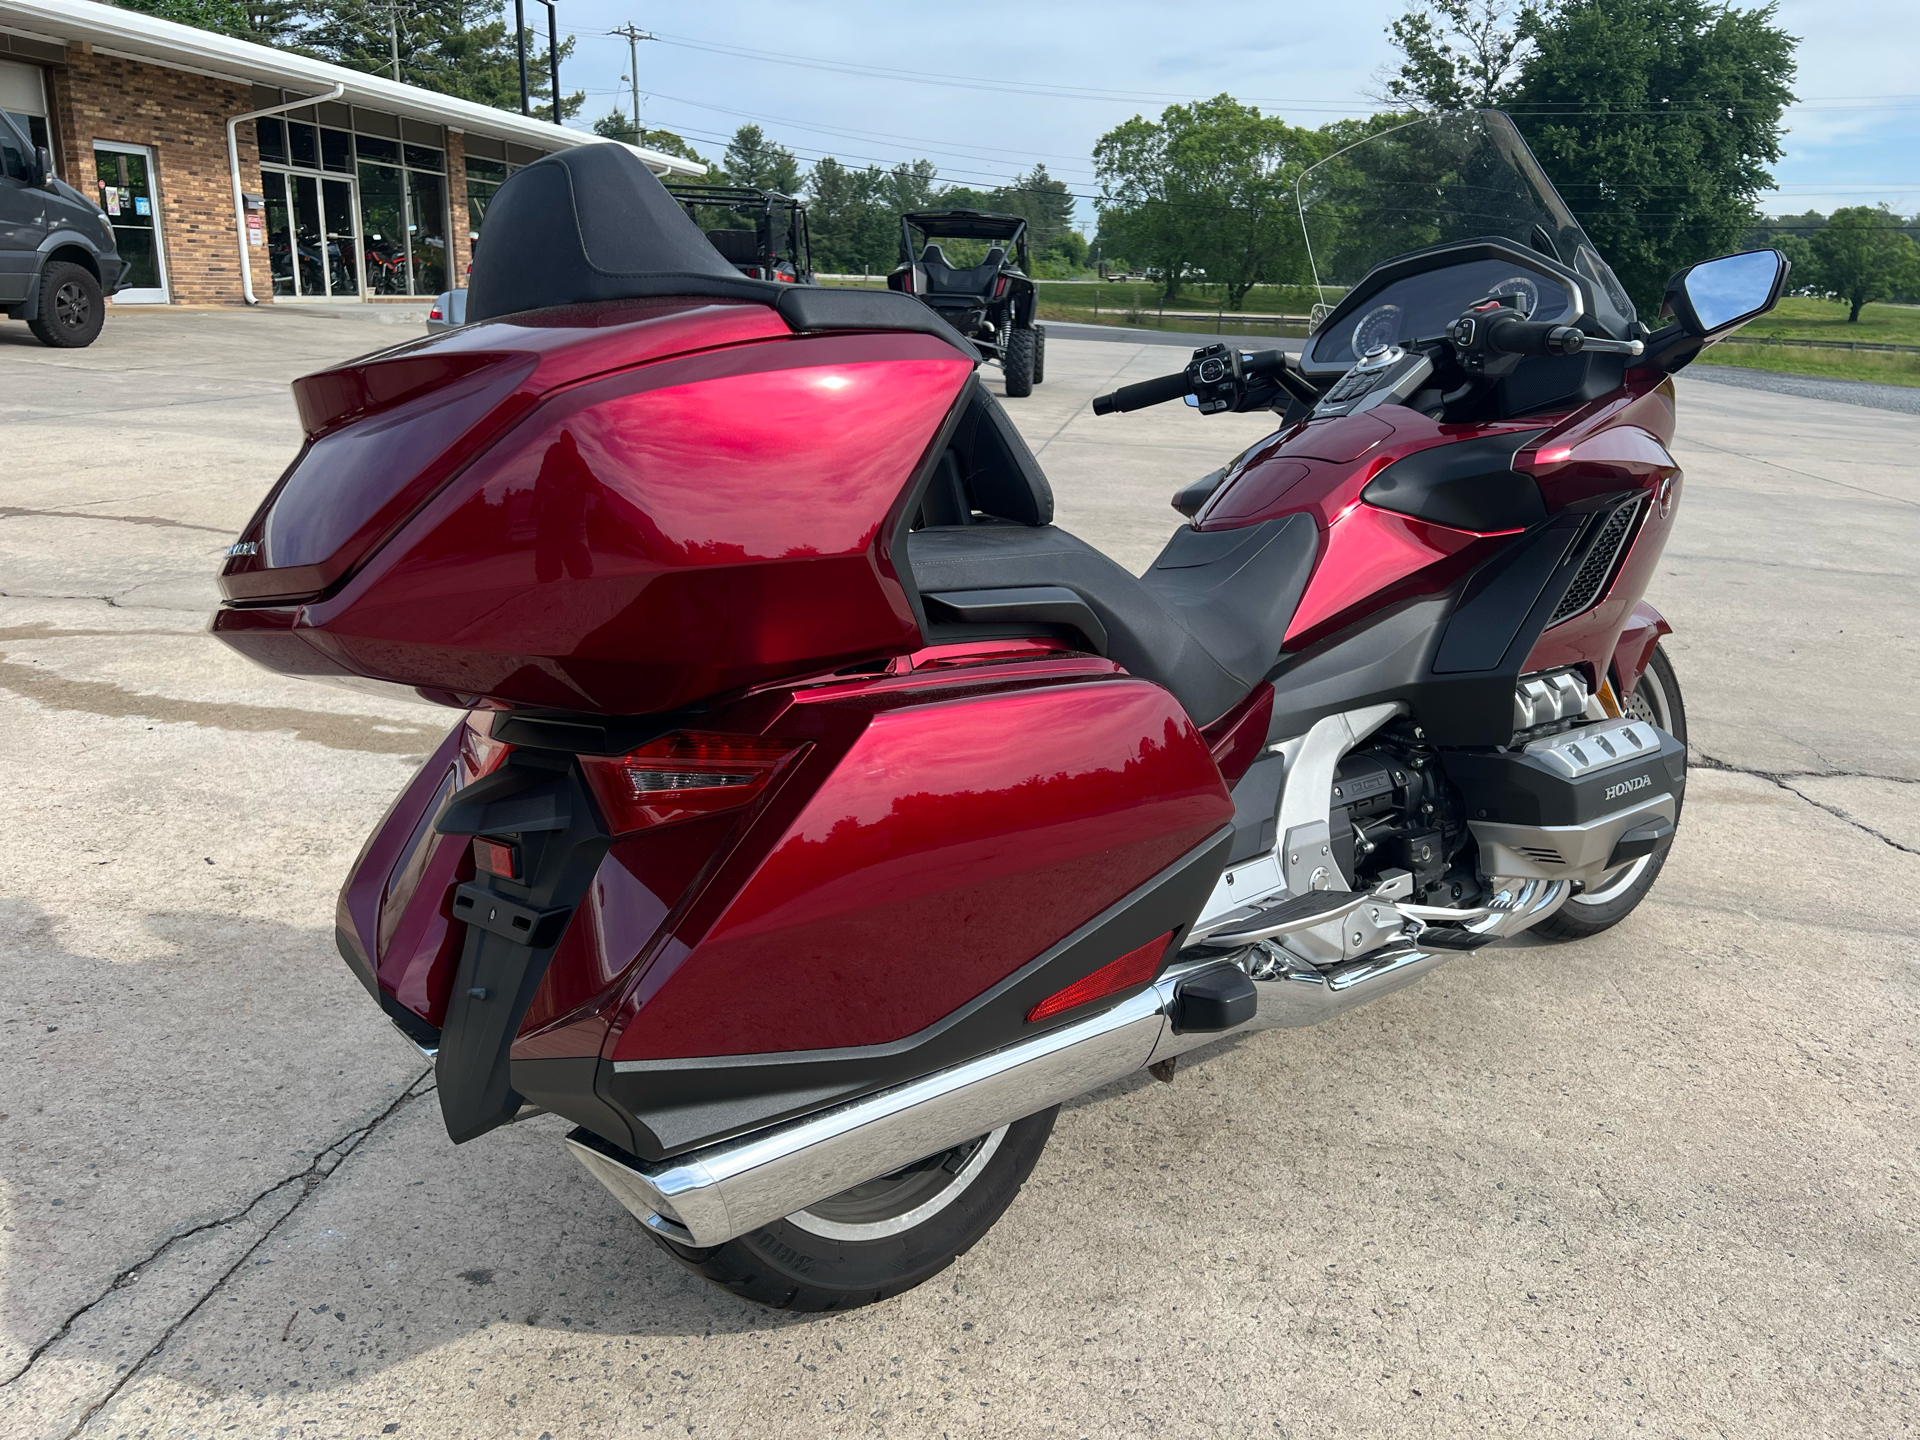 2018 Honda Gold Wing Tour Automatic DCT in Hendersonville, North Carolina - Photo 2